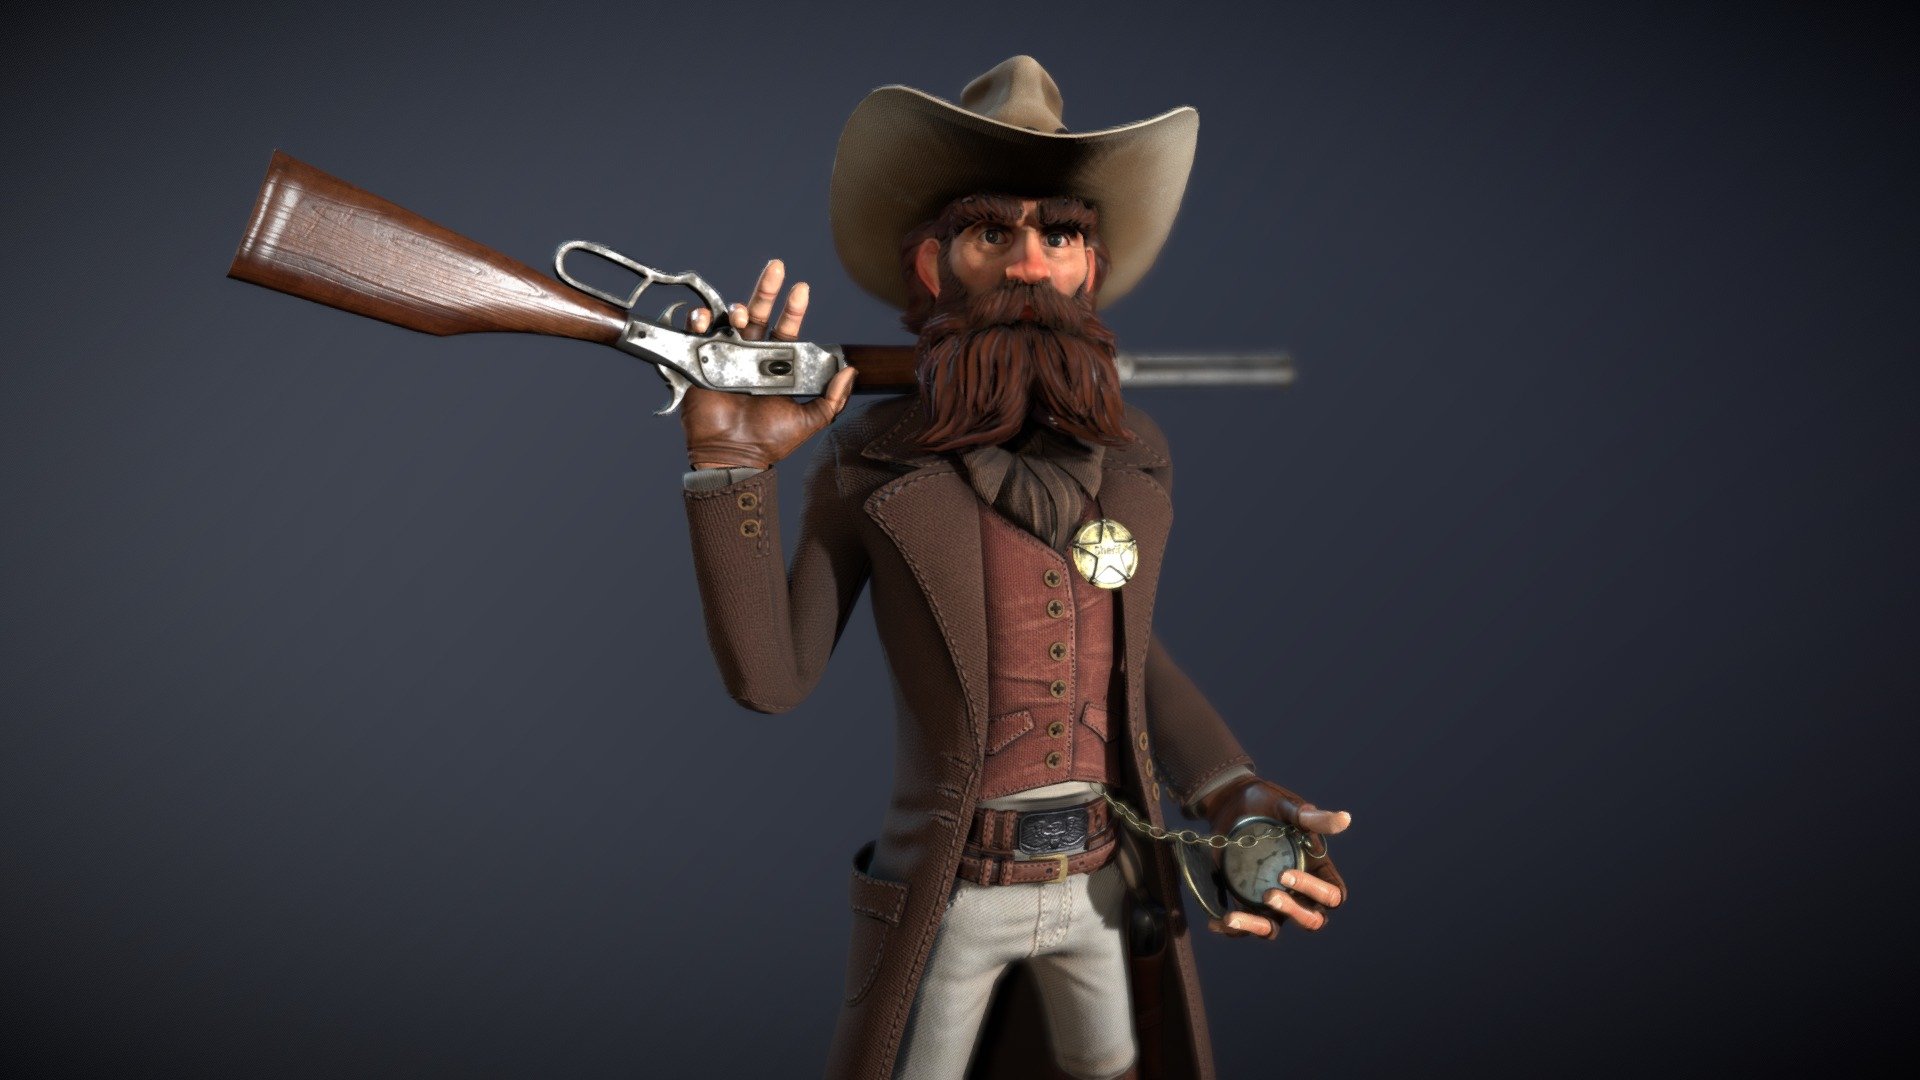 this a model i am doing for a Artstation contest, Game Character Art (real-time) i hope you like it and give me support here is the link 
https://www.artstation.com/contests/wild-west/challenges/43/submissions/27516 - Lowman - 3D model by alitocarioca 3d model